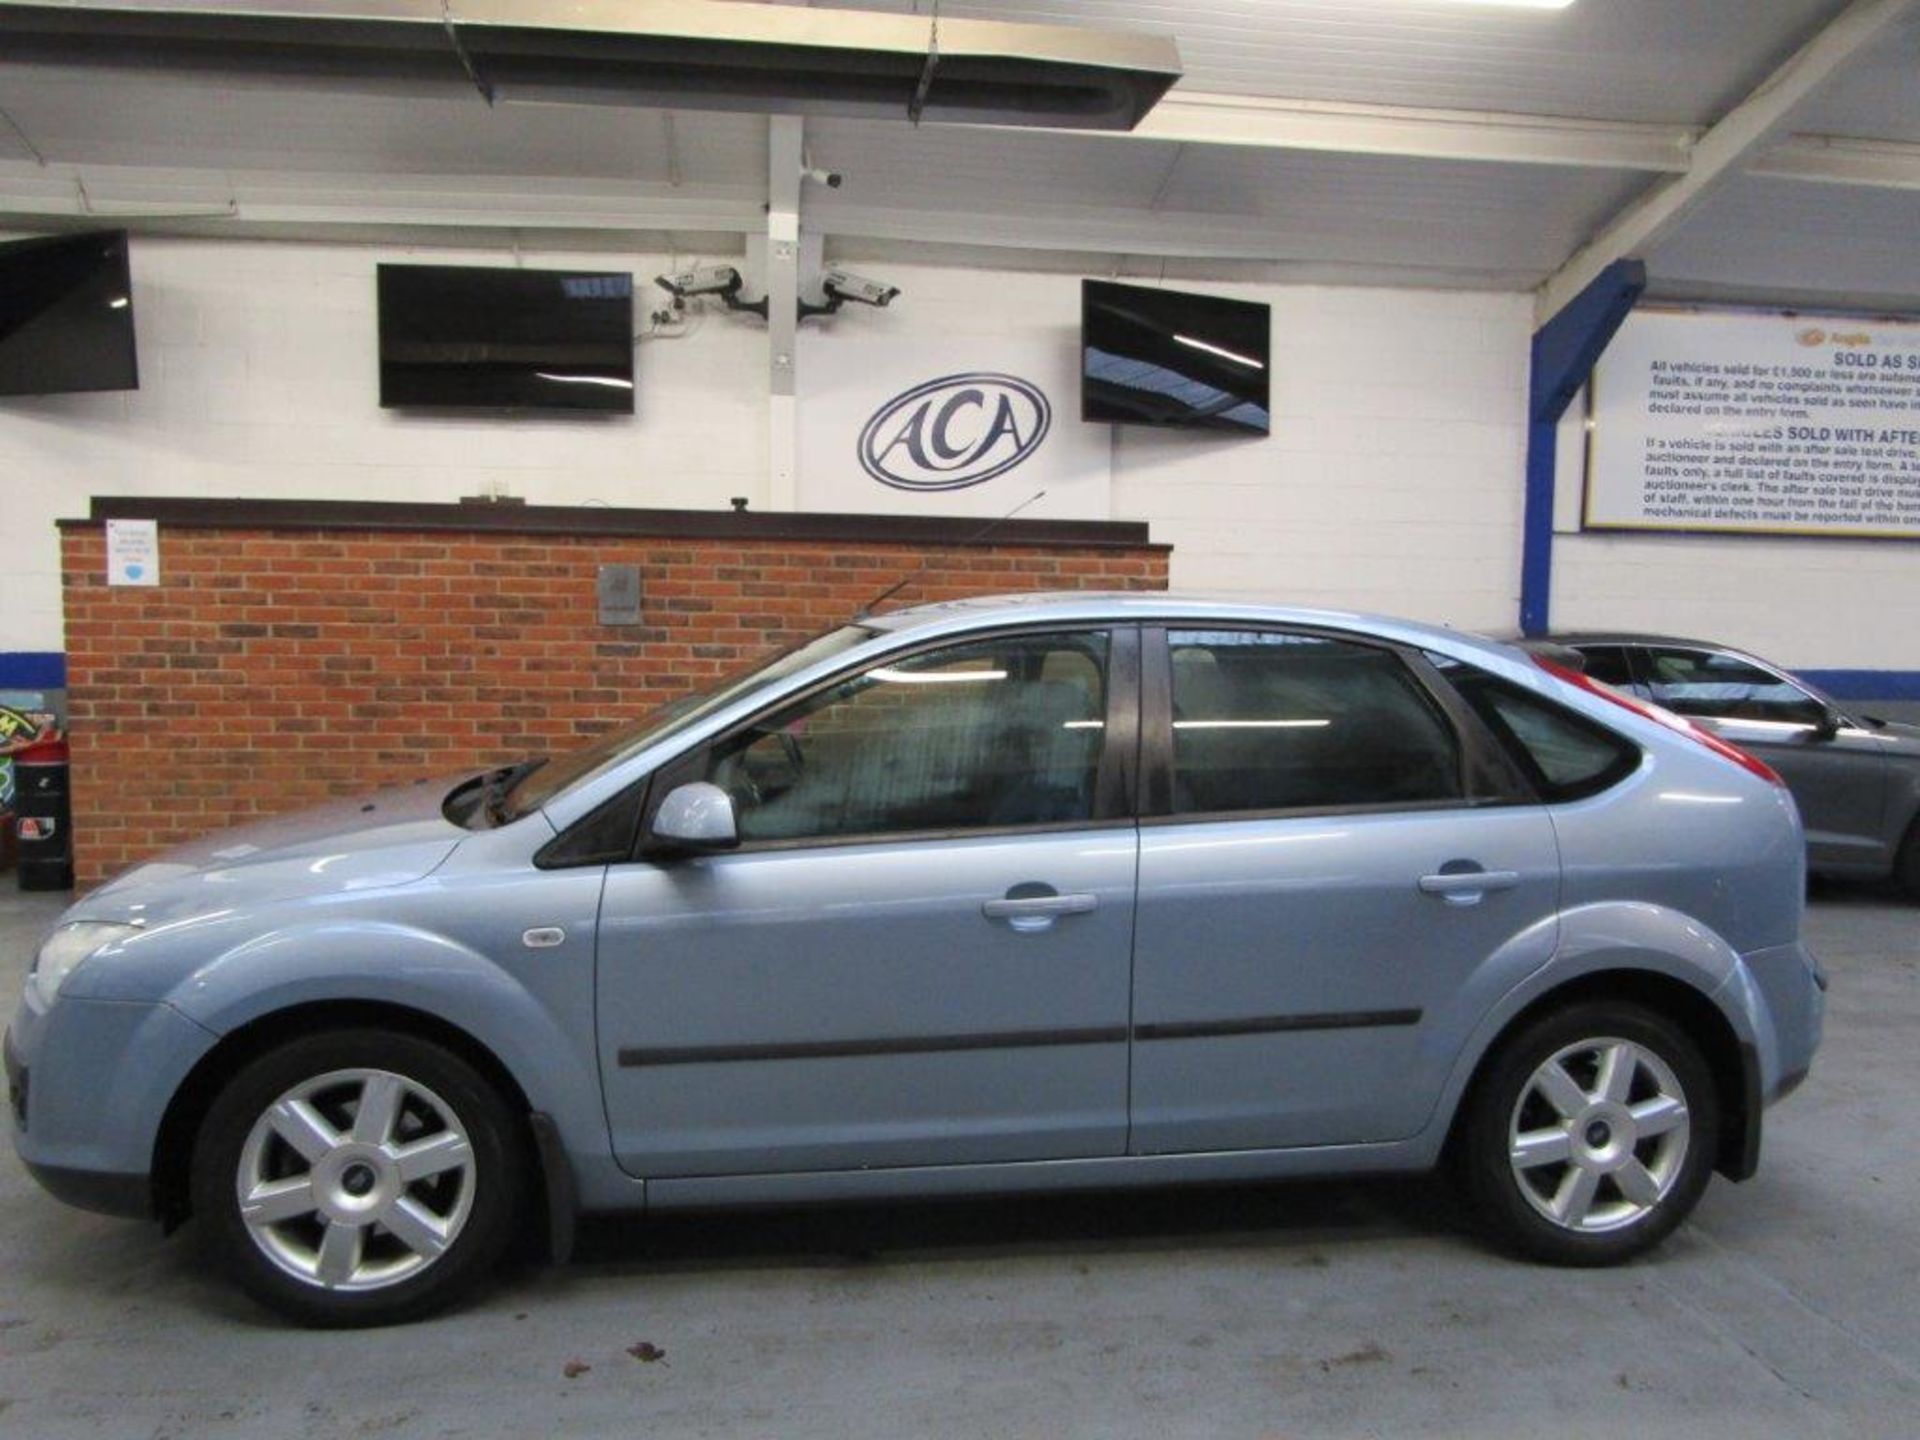 07 07 Ford Focus Sport - Image 2 of 21